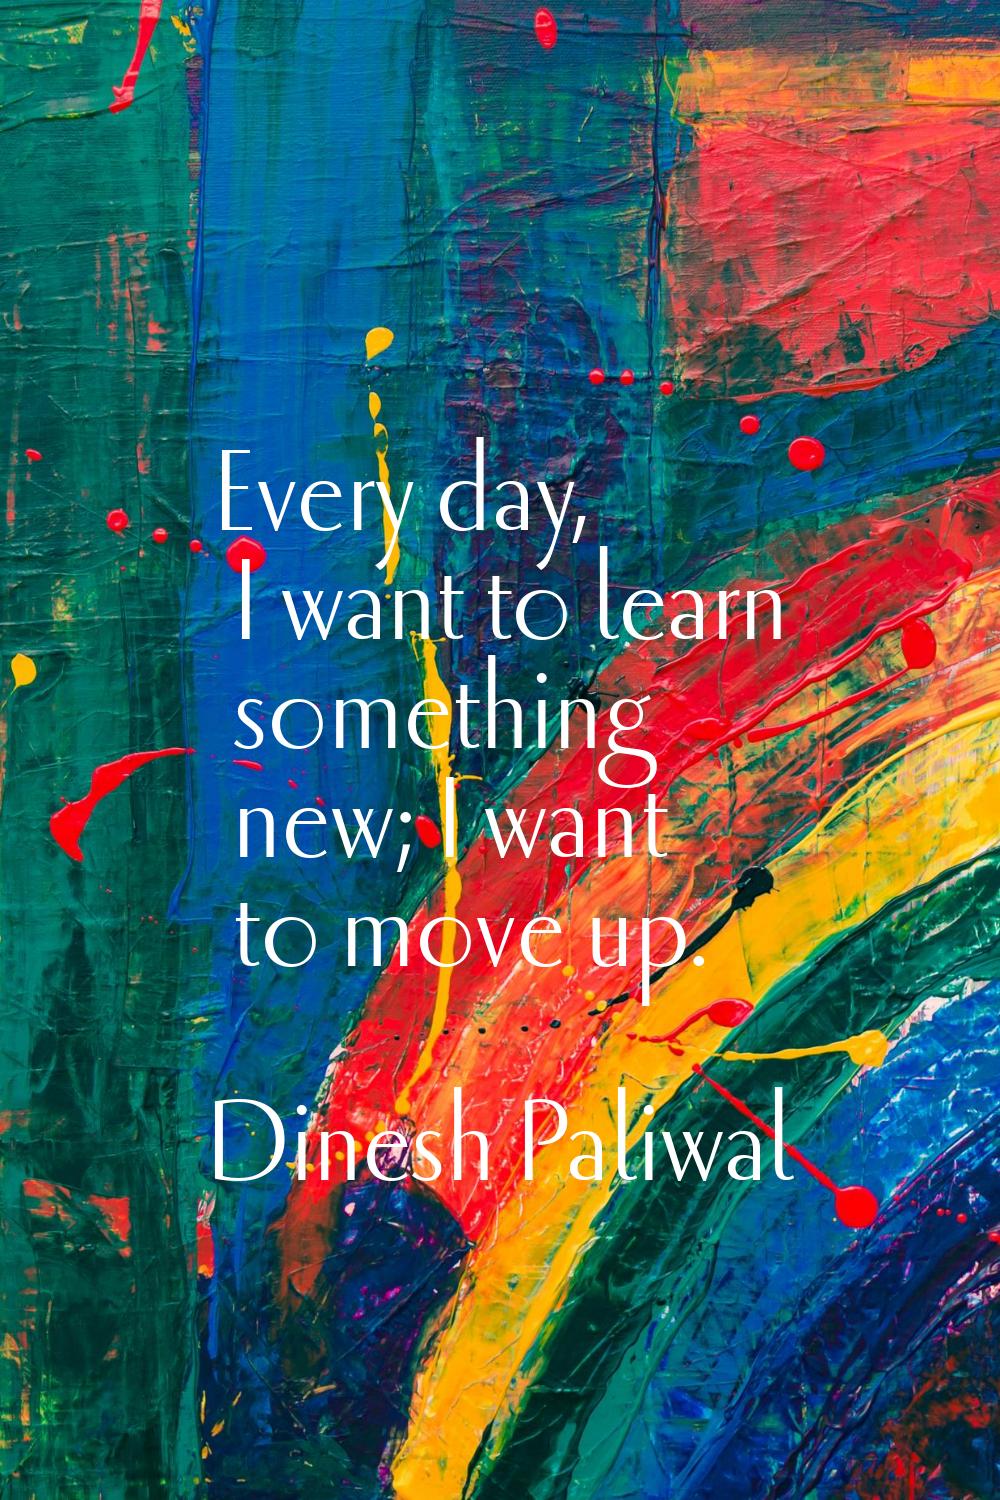 Every day, I want to learn something new; I want to move up.